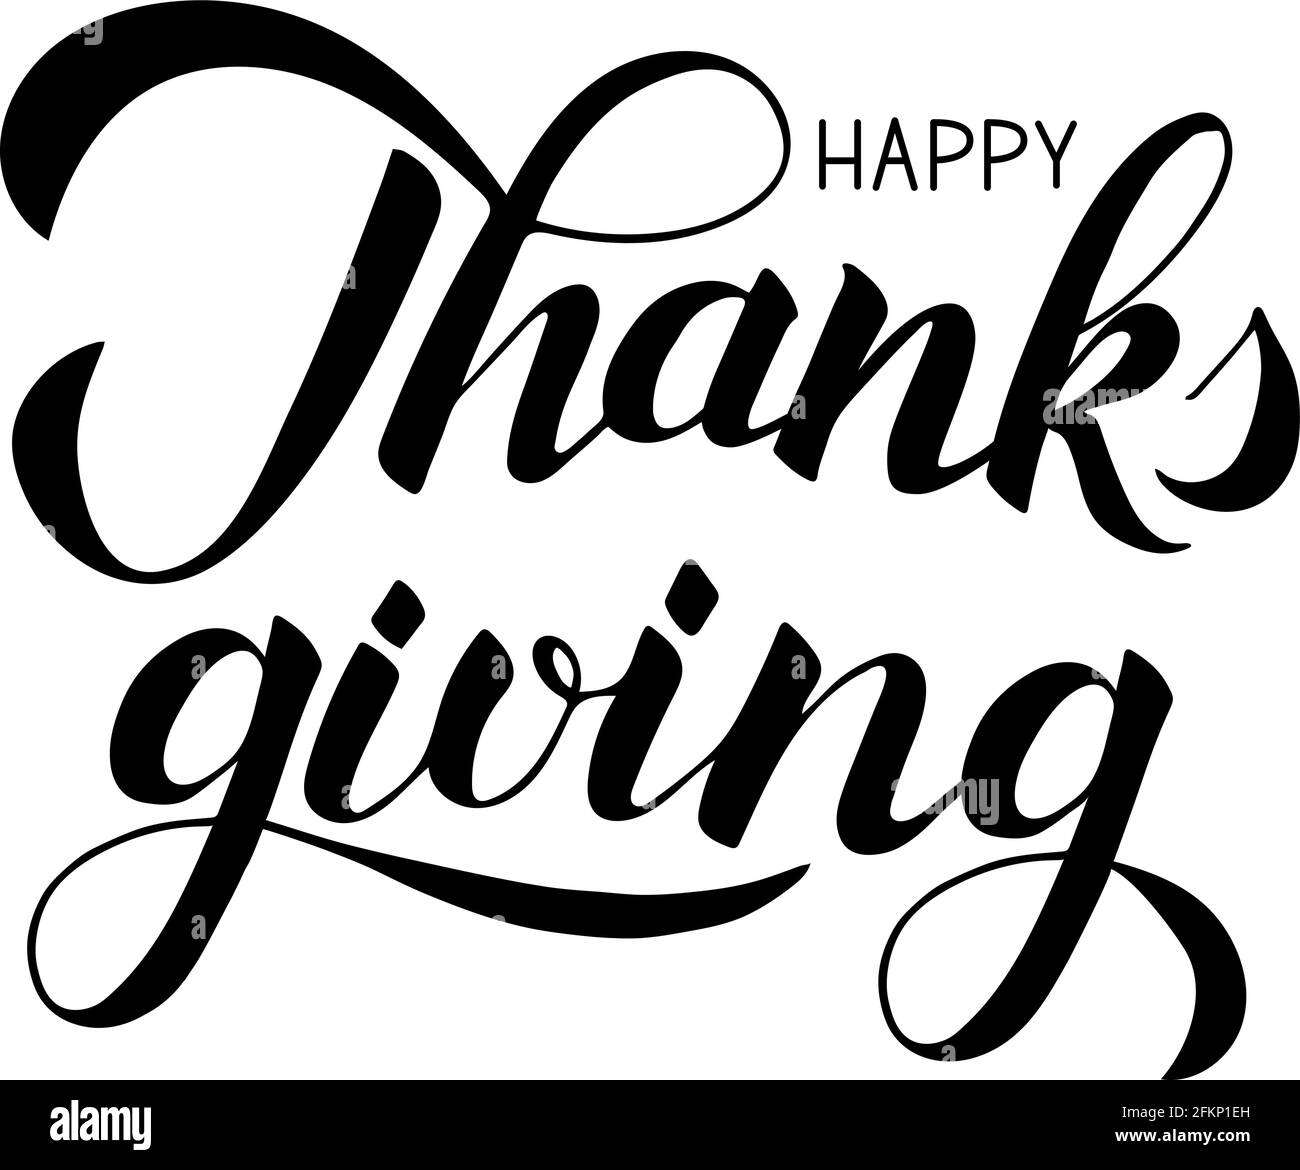 Thanksgiving day vector illustration. Happy Thanks giving hand written with brush. Calligraphy lettering isolated on white. Easy to edit template for Stock Vector